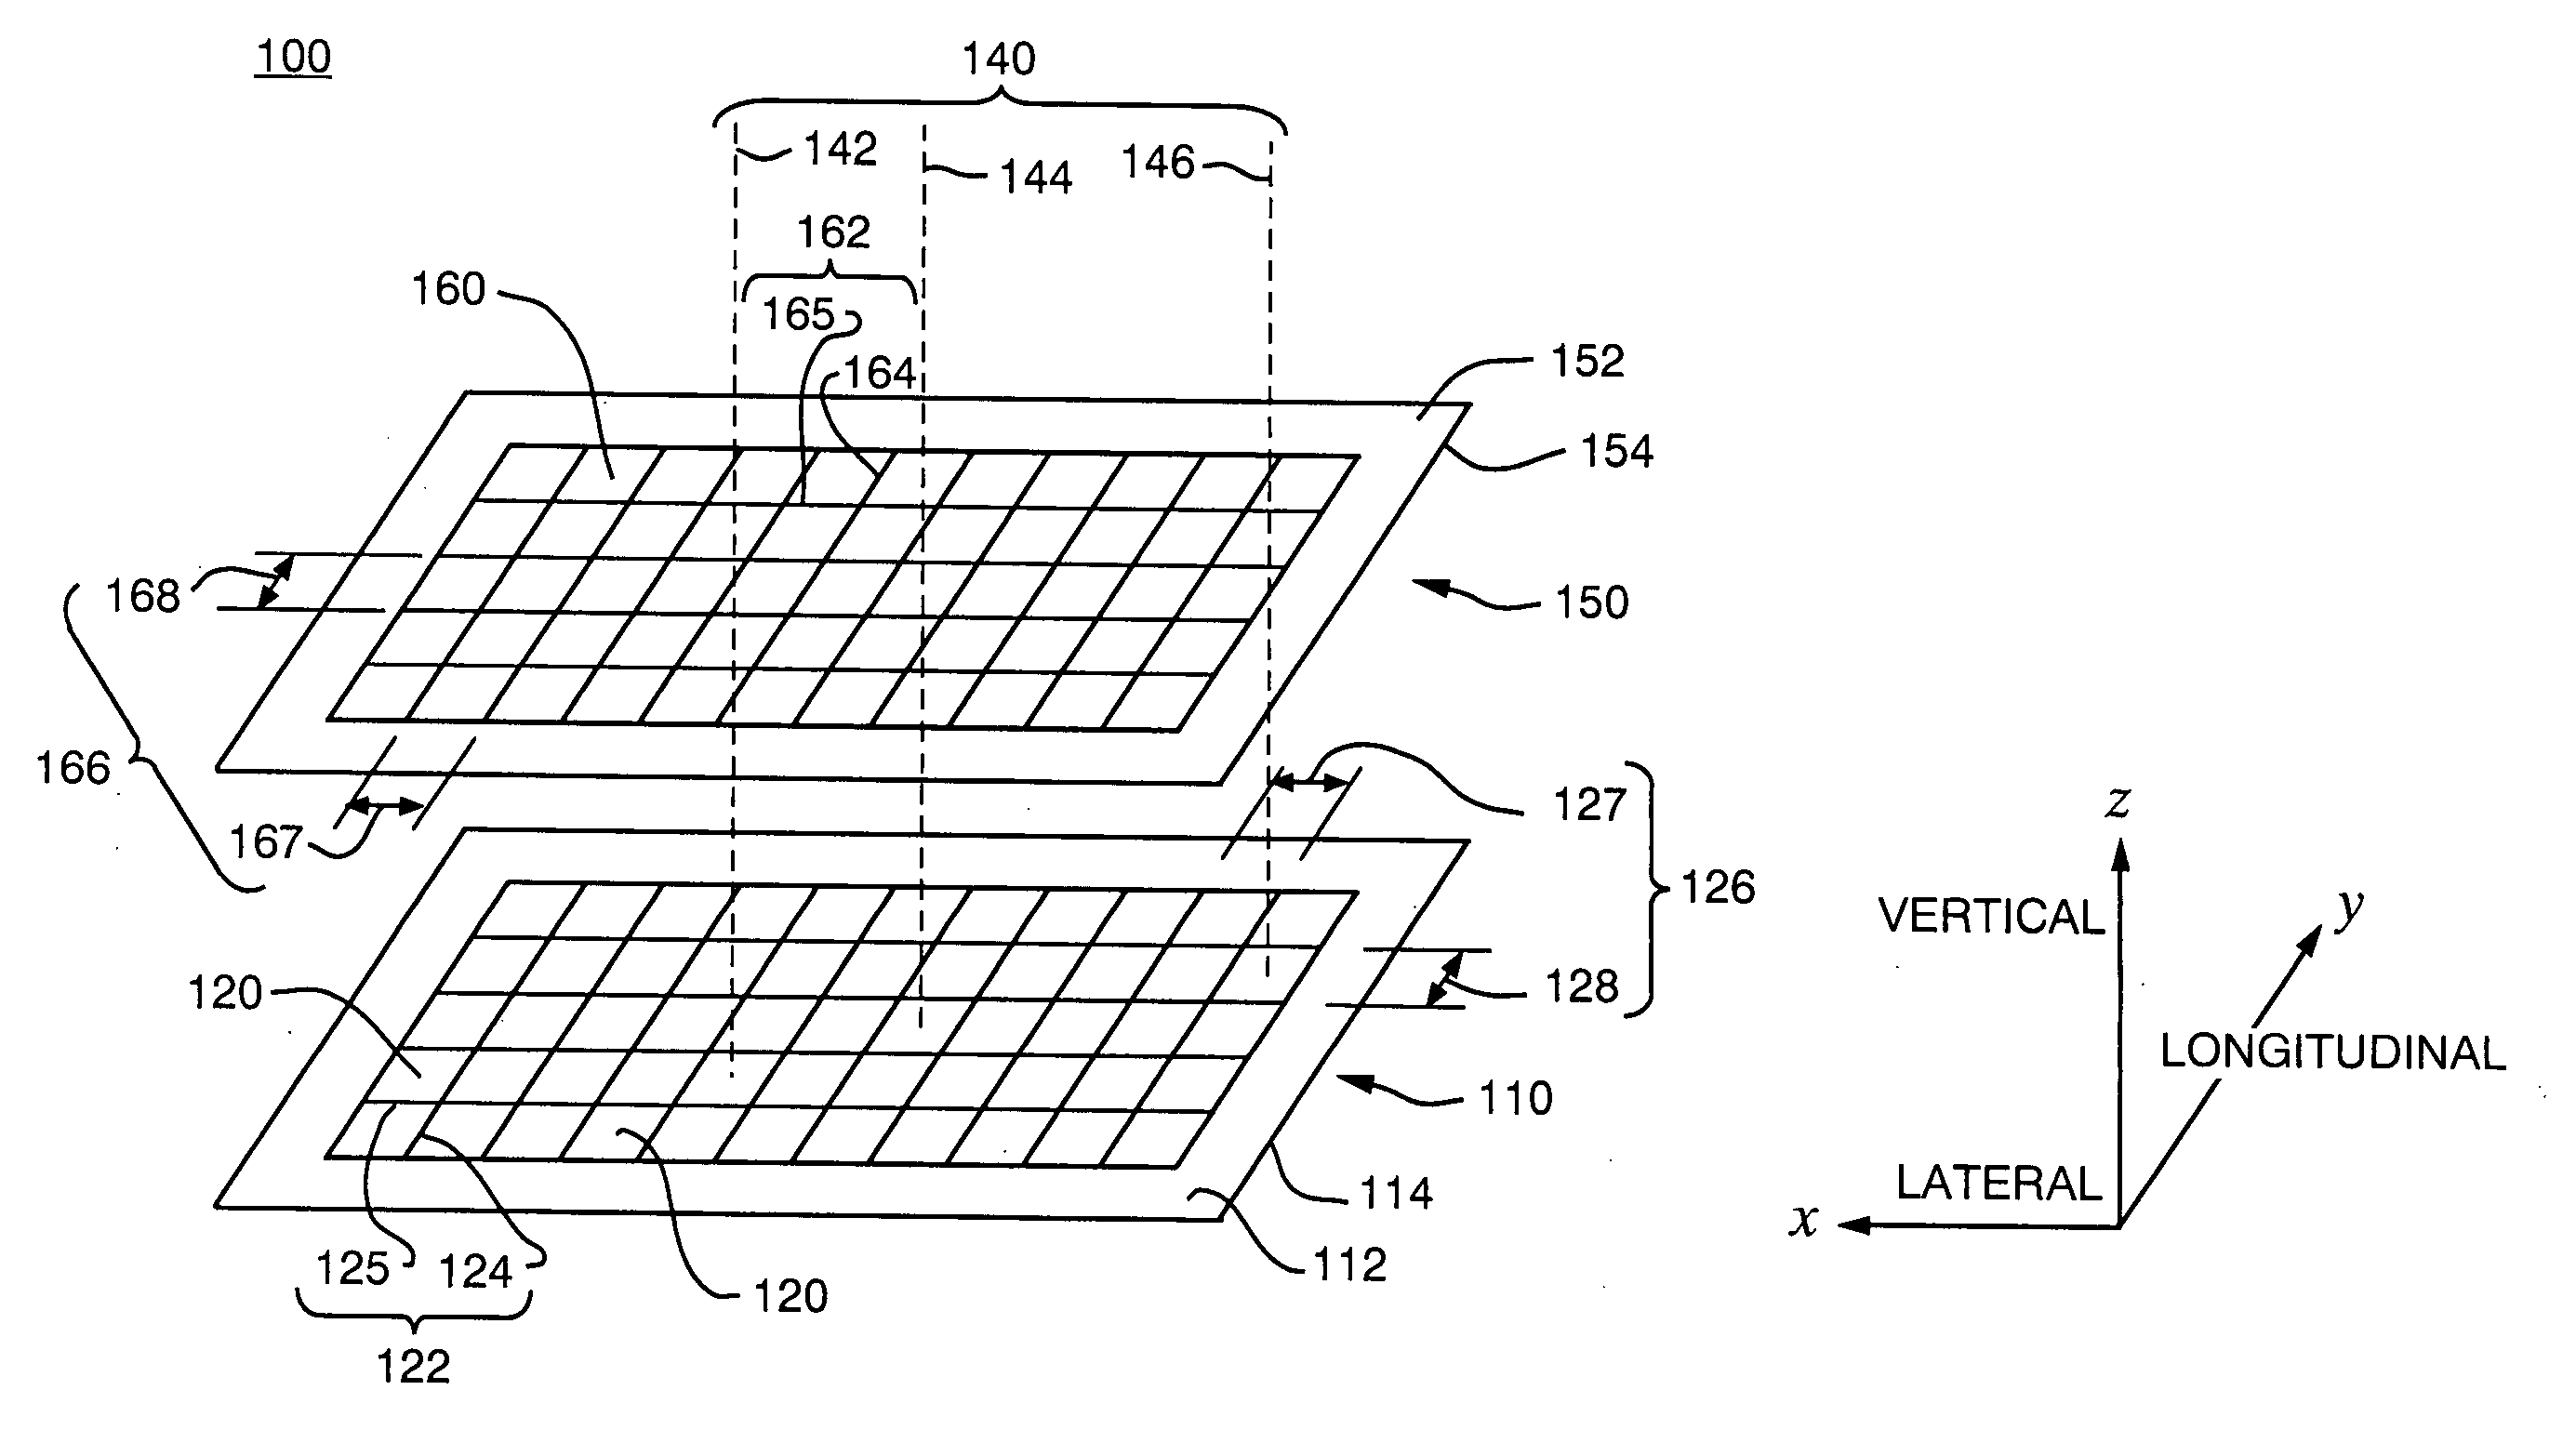 Multifunctional periodic cellular solids and the method of making thereof